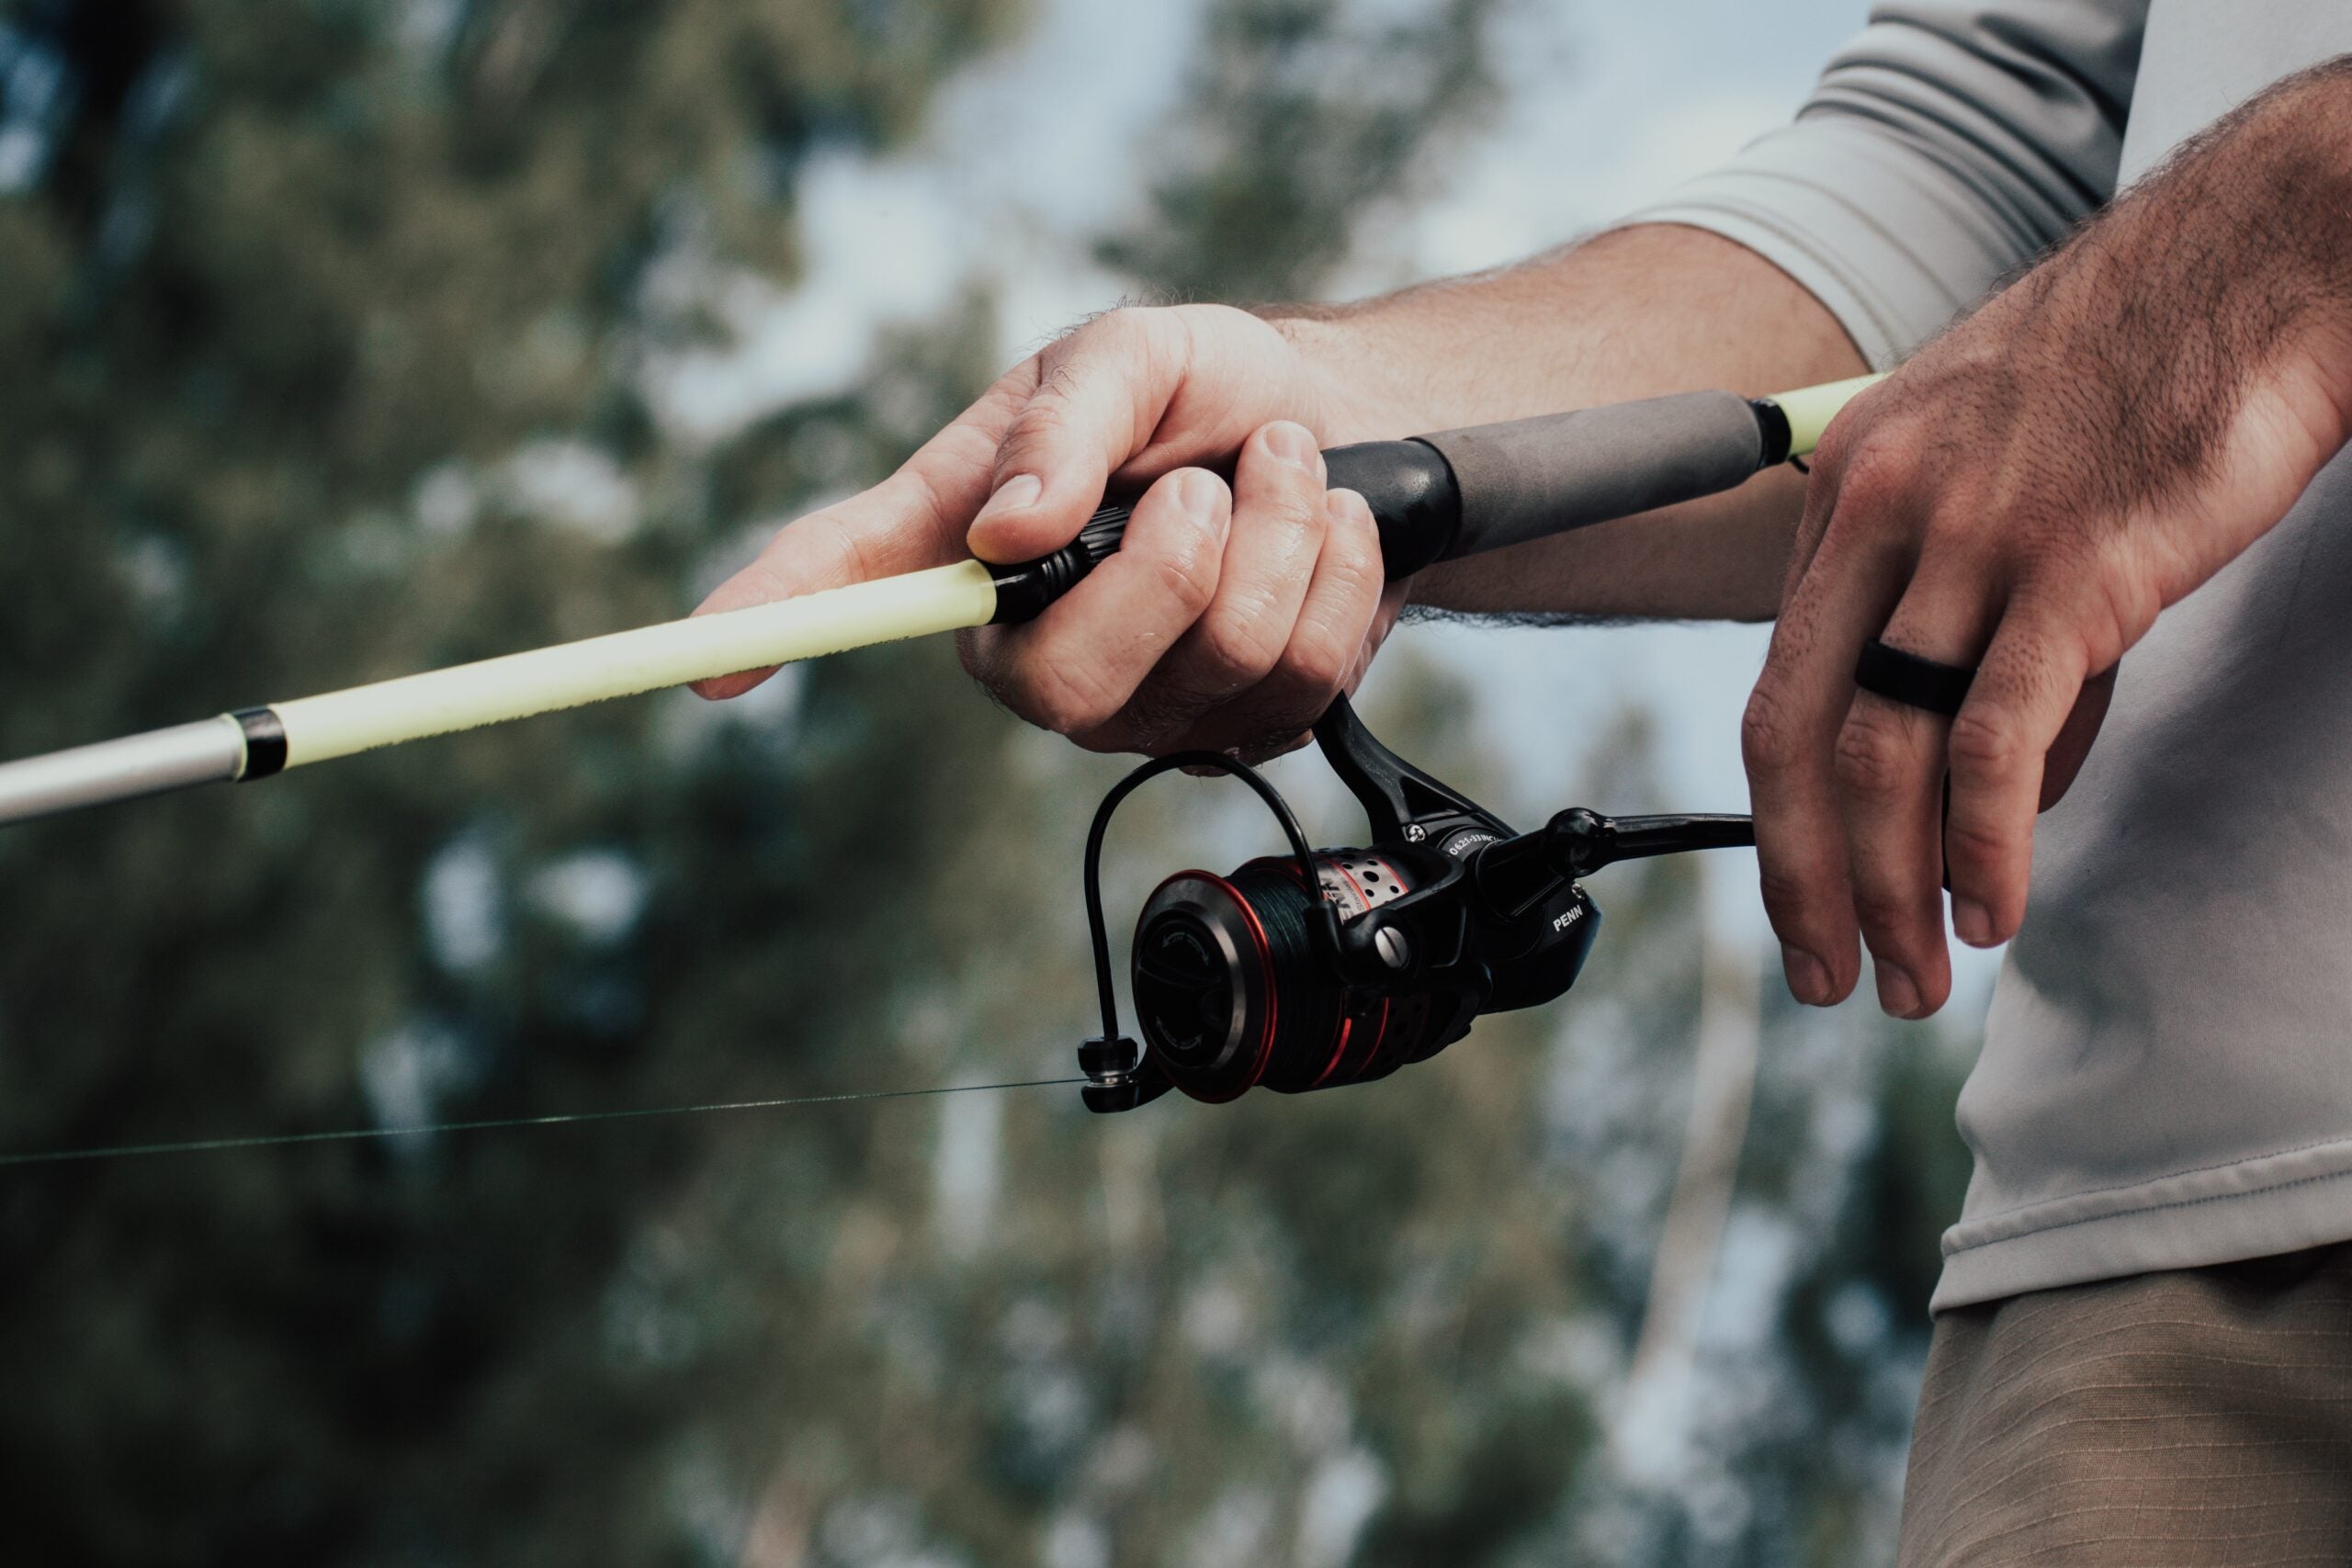 Guide for Buying the best fishing reel for your next fishing trip